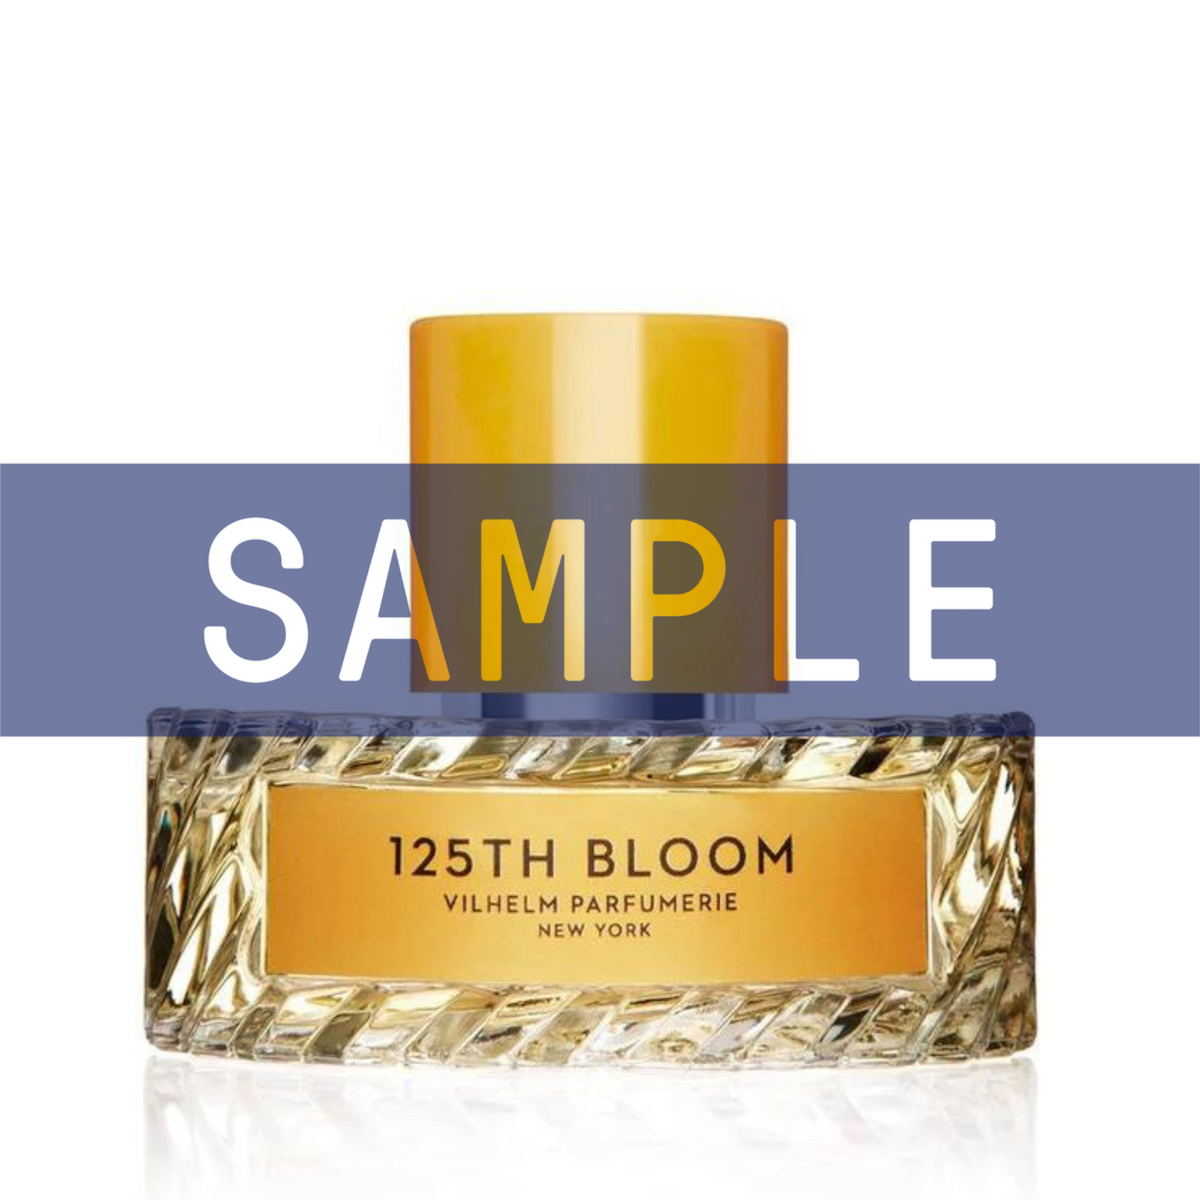 Primary Image of Sample - 125th + Bloom EDP